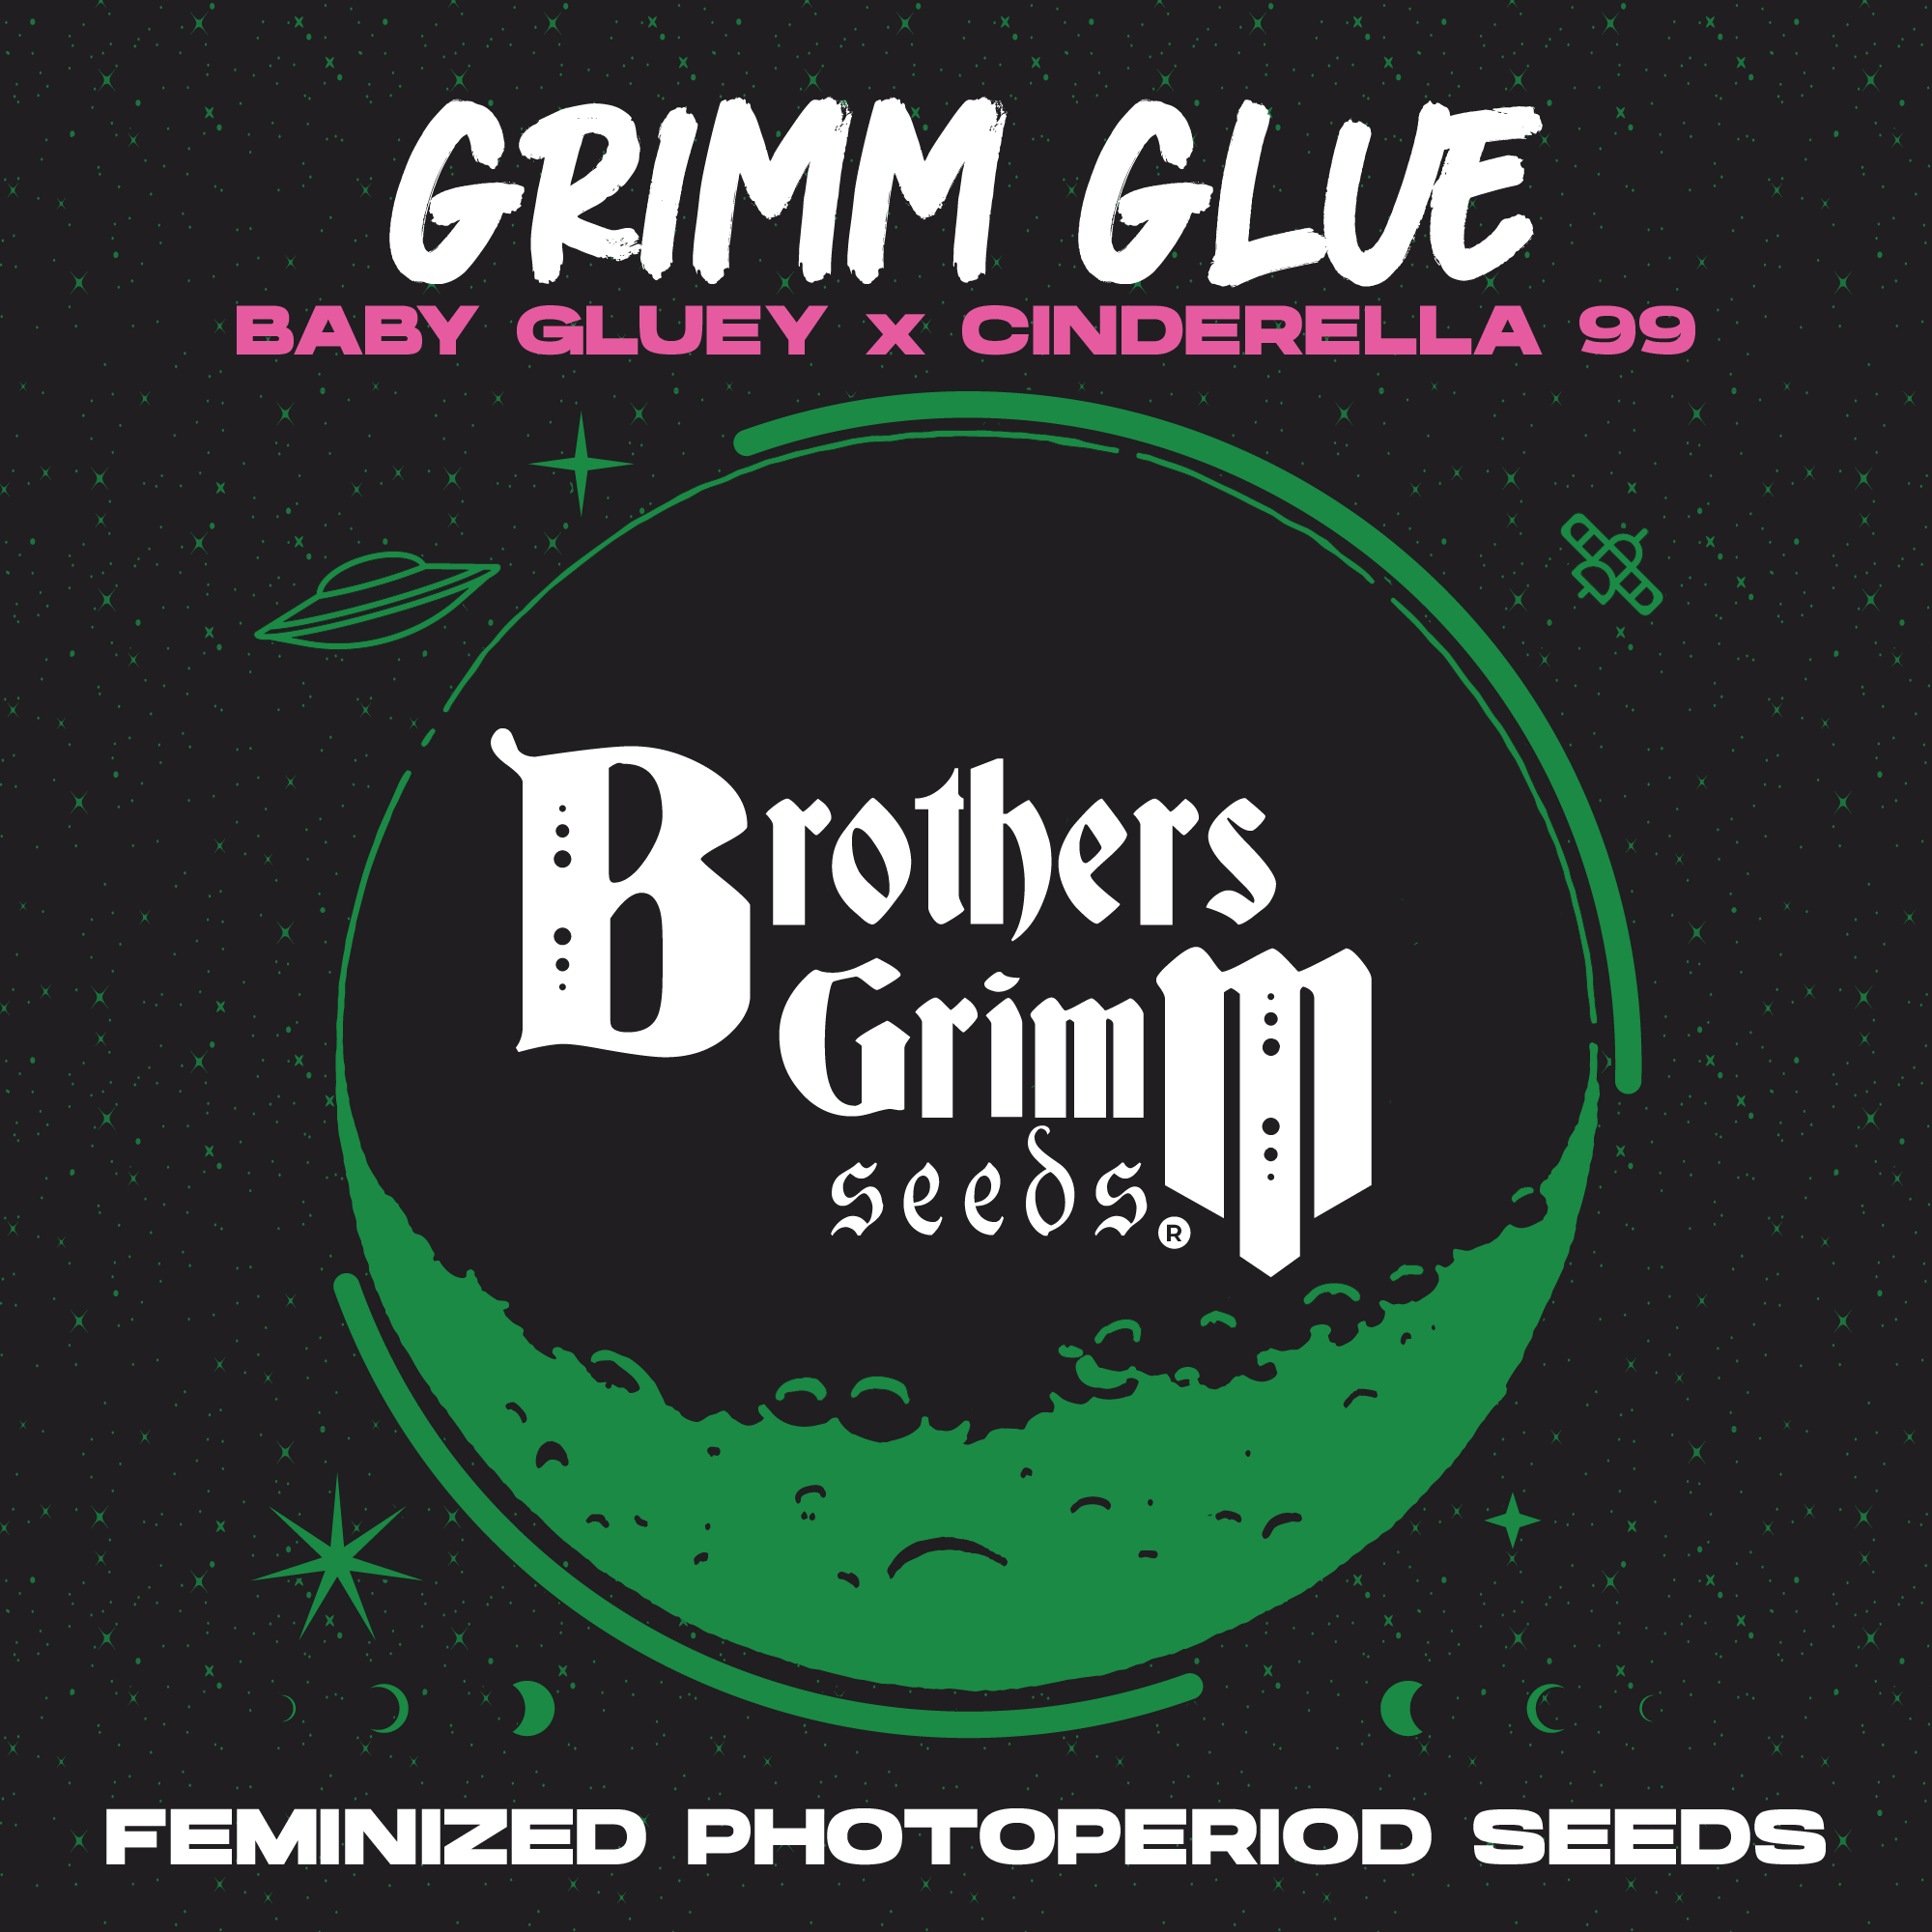 Grimm Glue by Brothers Grimm Seeds